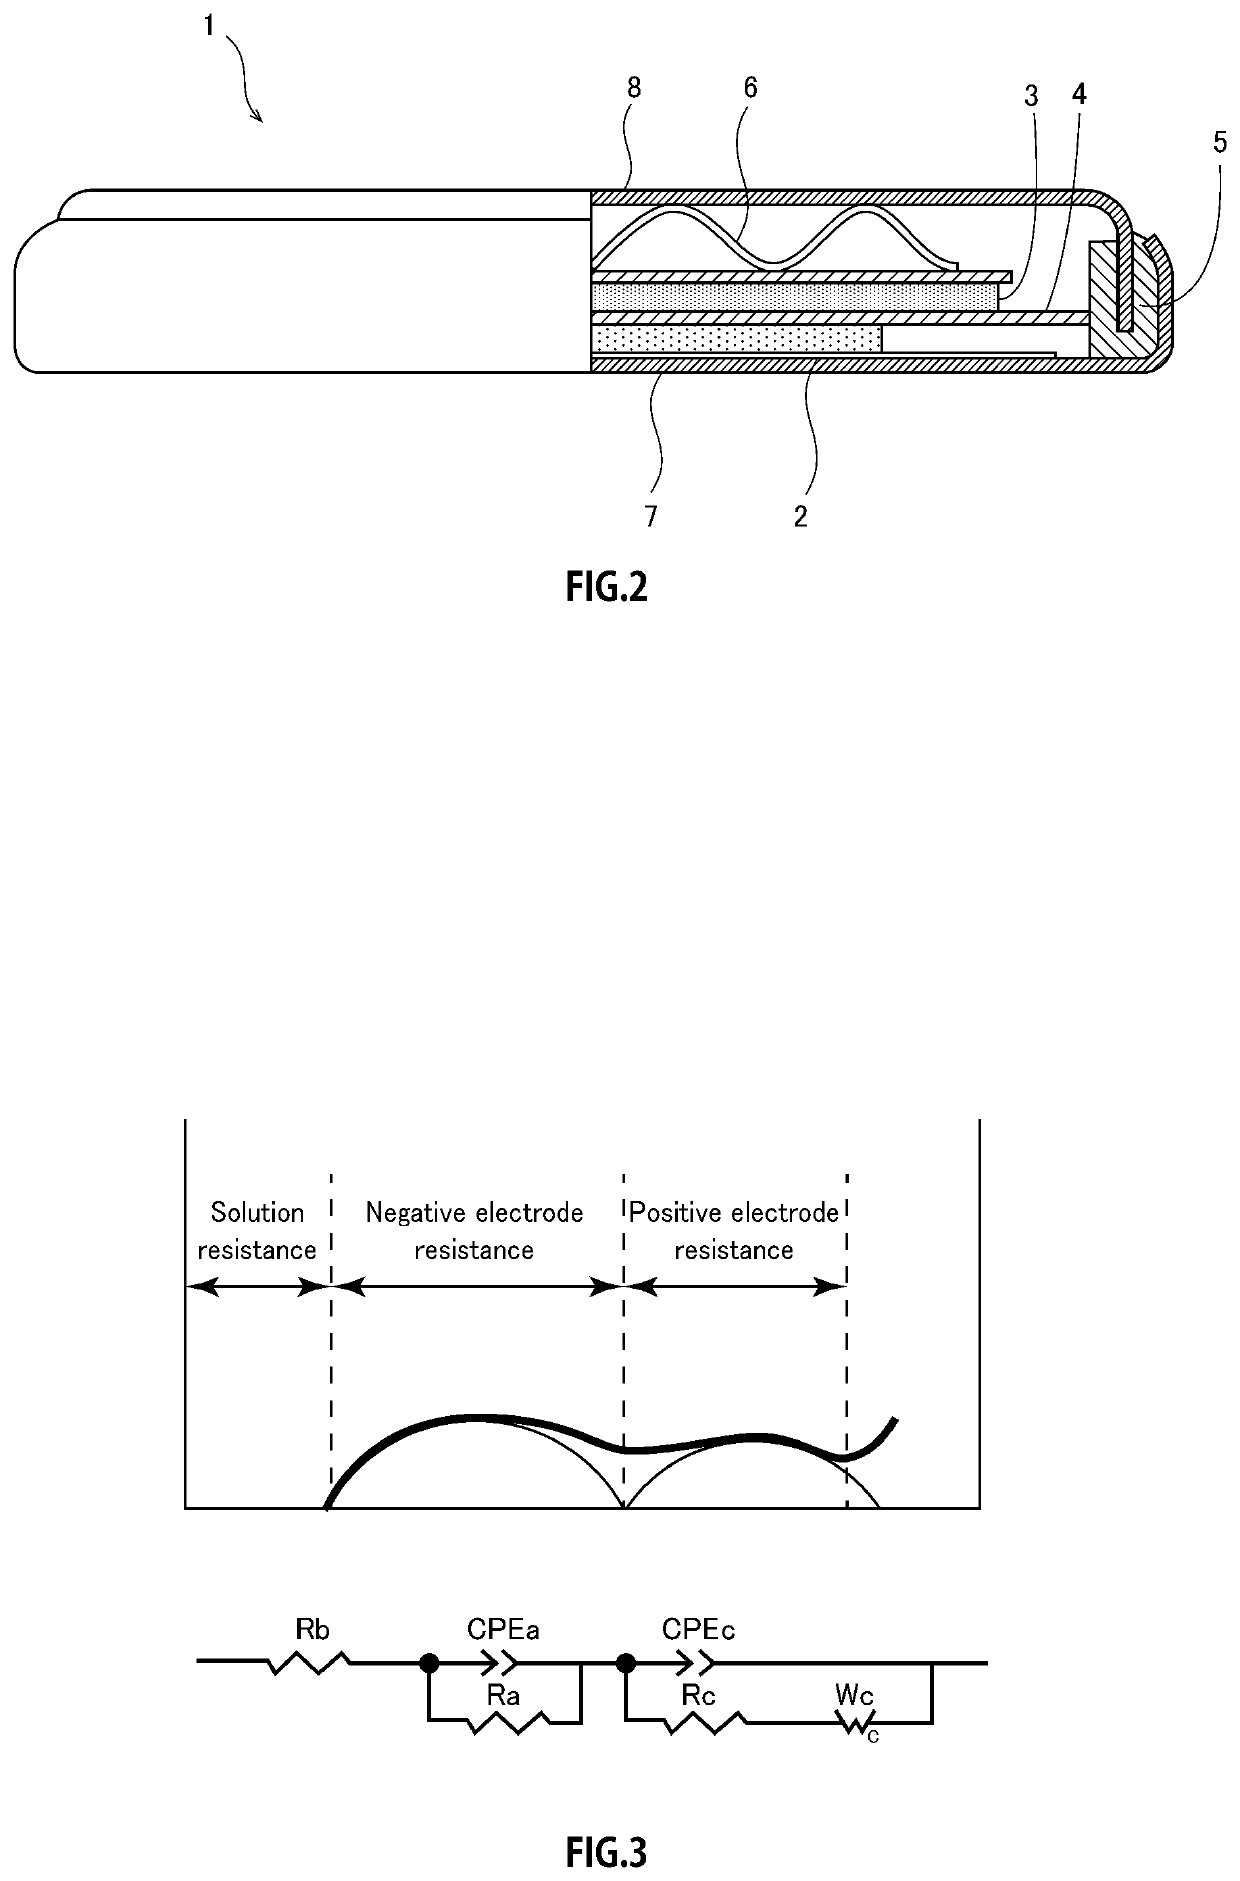 Positive electrode active material for non-aqueous electrolyte secondary battery, process for manufacturing positive electrode active material for non-aqueous electrolyte secondary battery, and non-aqueous electrolyte secondary battery using the positive electrode active material